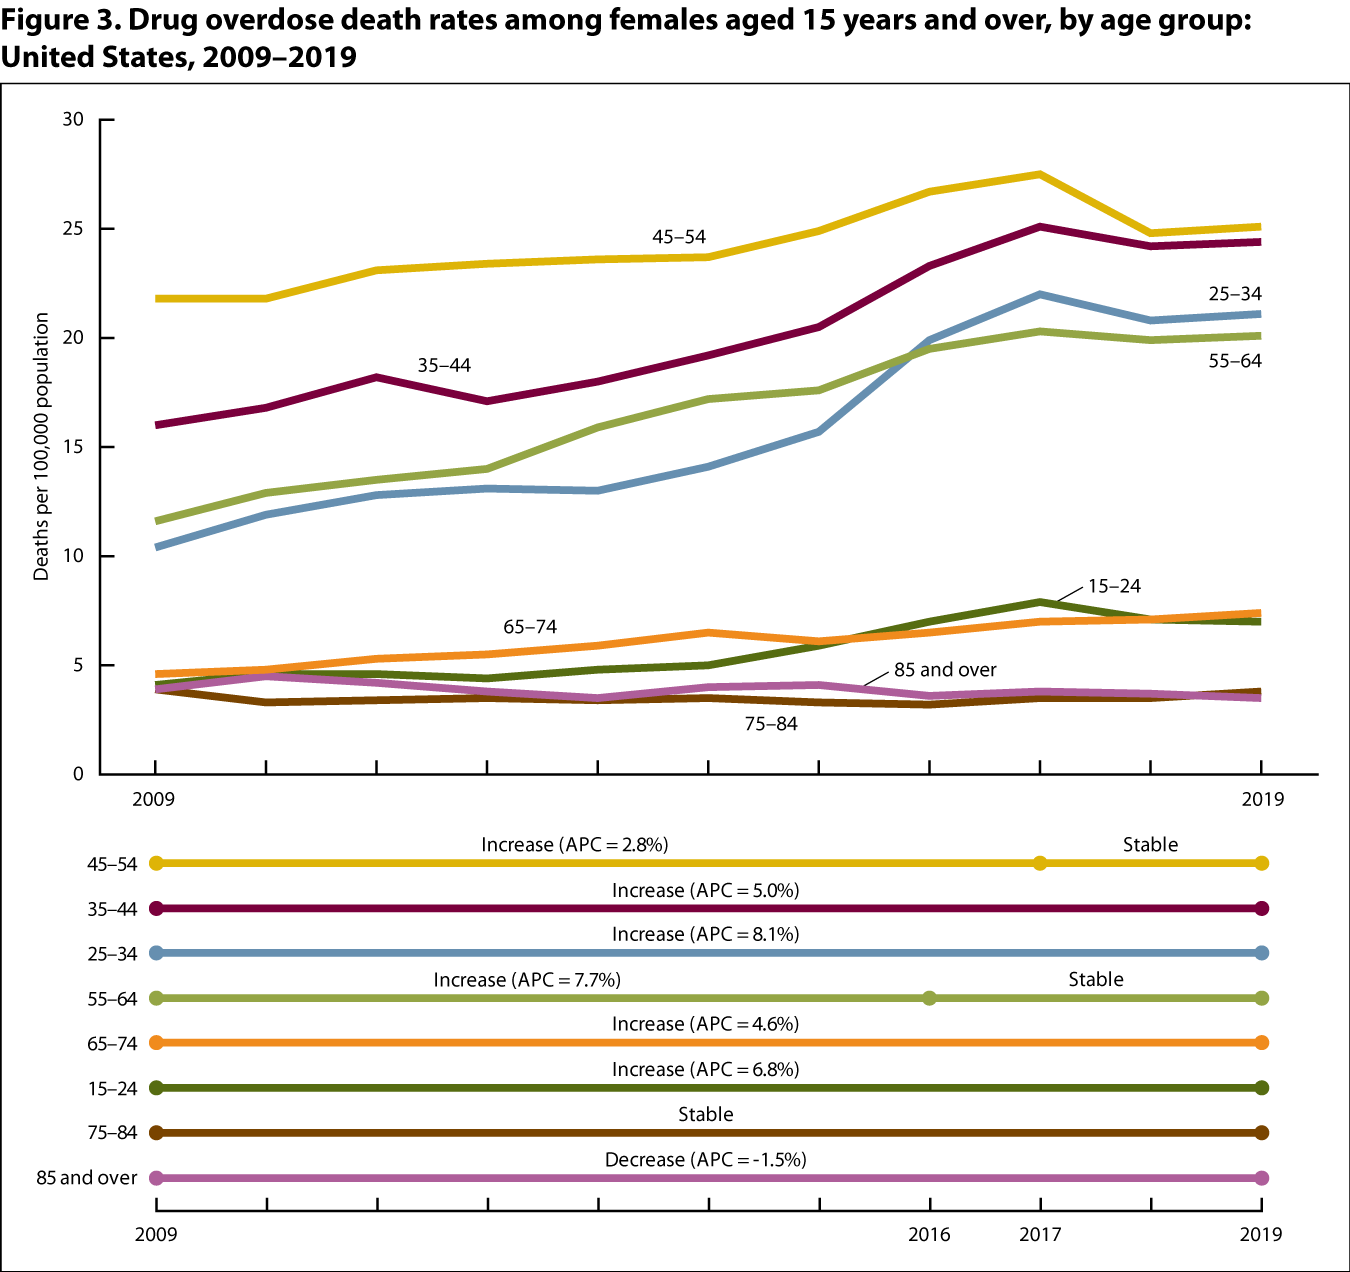 Figure 3 is a line graph showing drug overdose death rates (deaths per 100,000 population) among females aged 15 years and over by age group for 2009 through 2019.